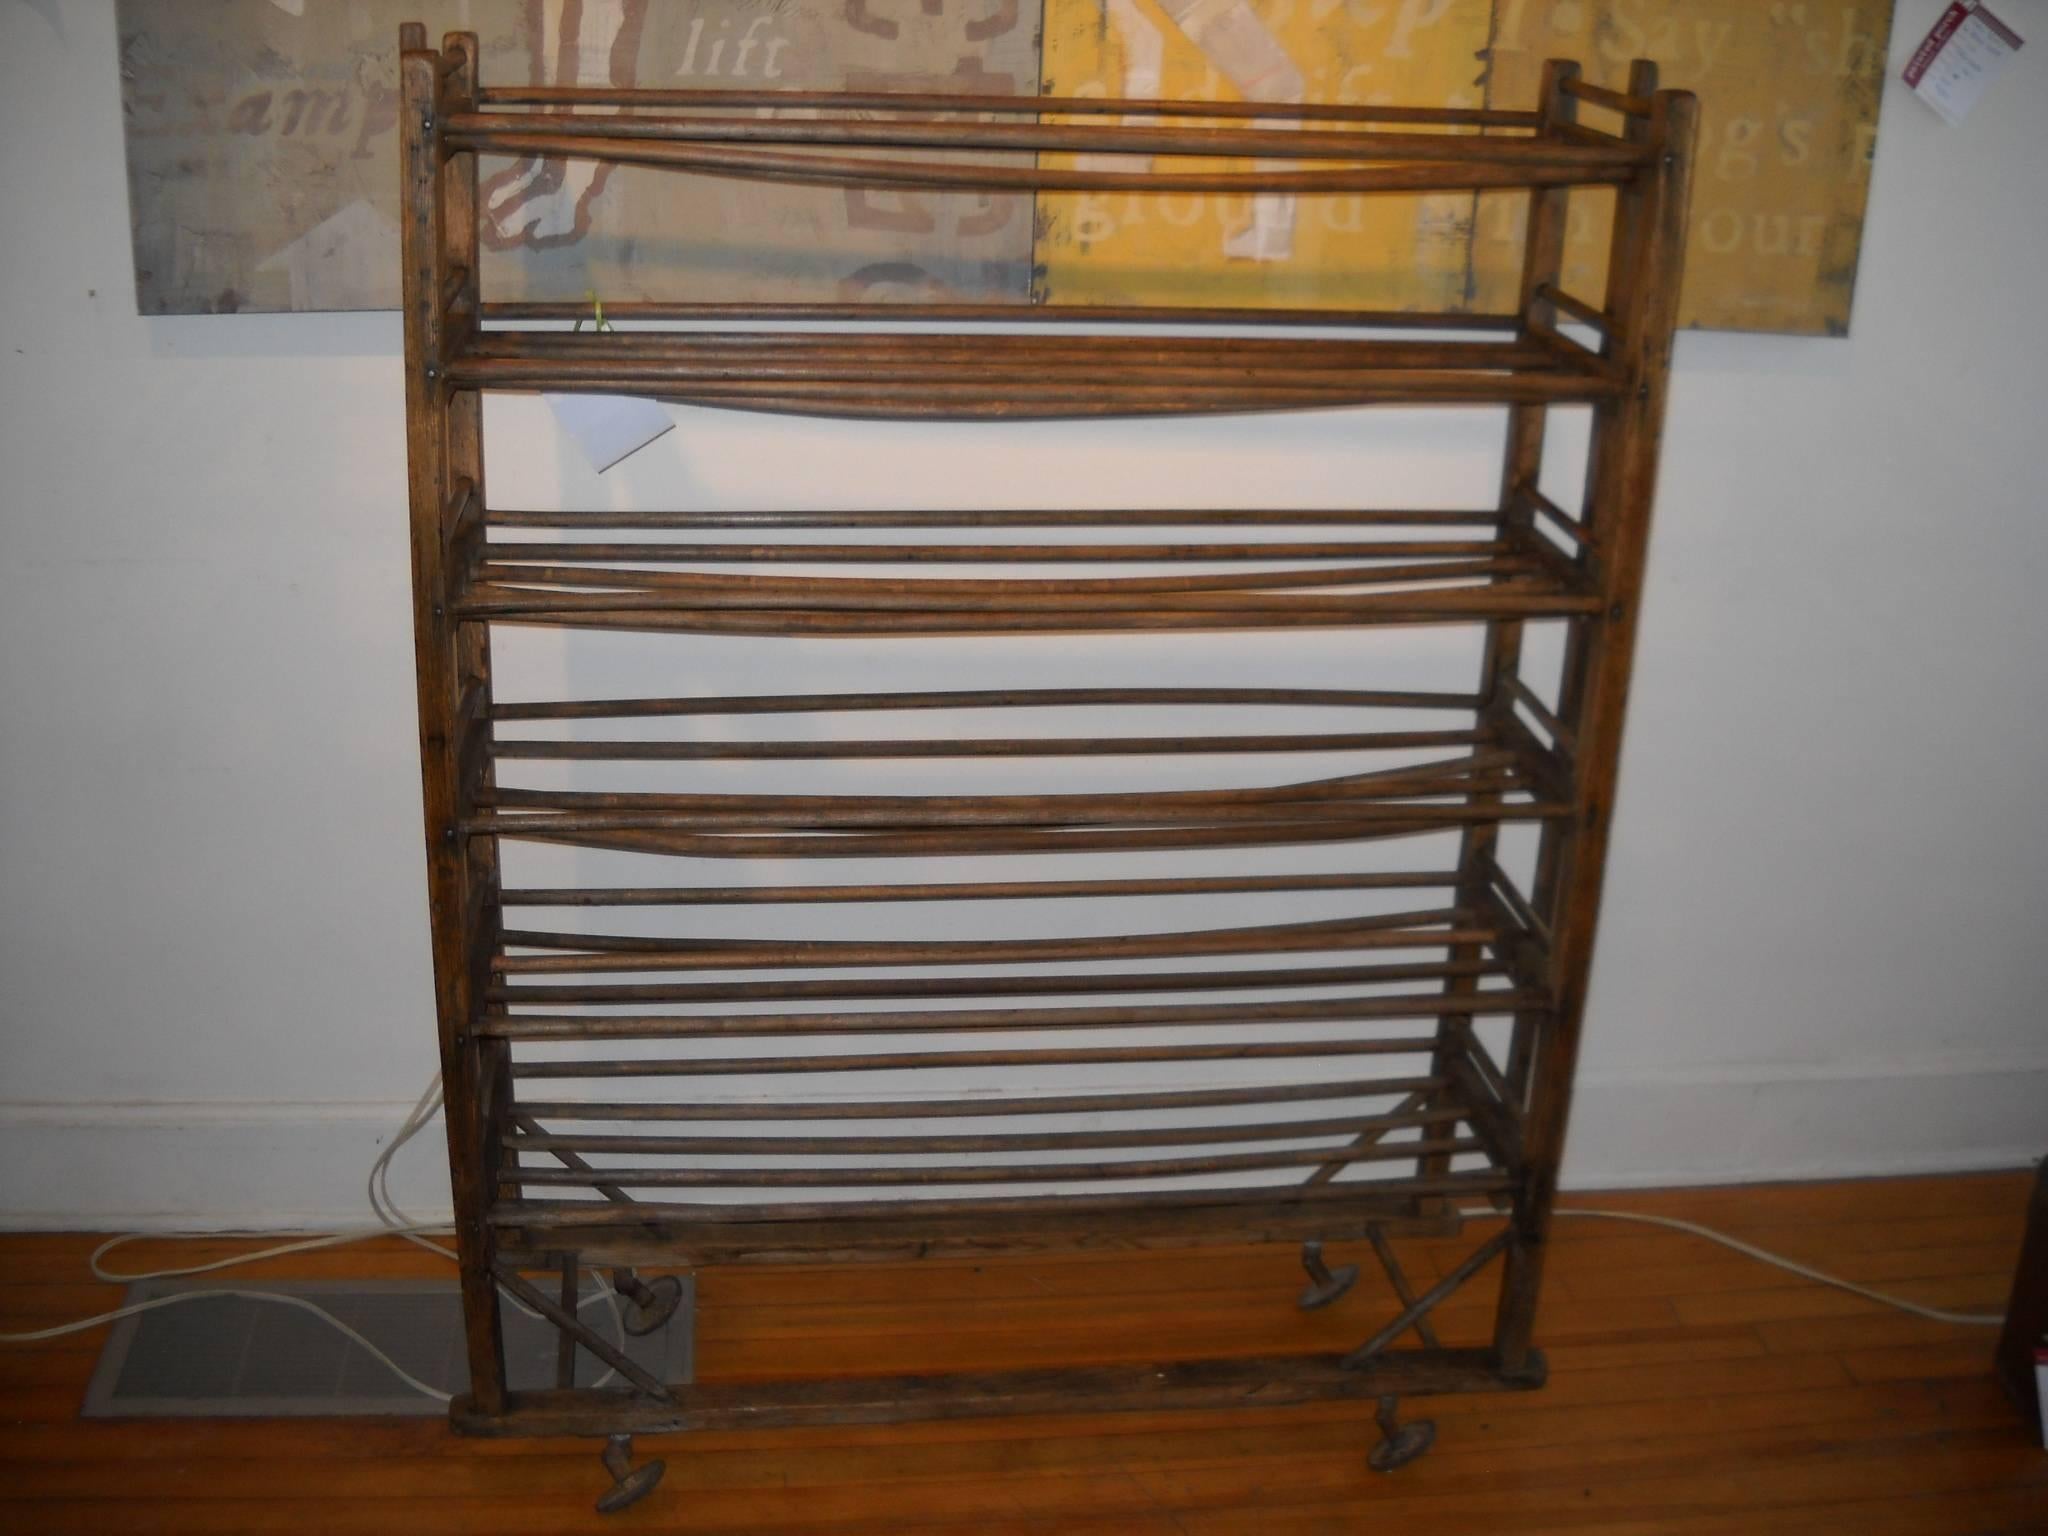 The English originally used these to dry shoes after making them. The French had the same item that were used as bakery racks. This particular piece has its original castors and they work wonderfully. This is a most useful piece that can be used to